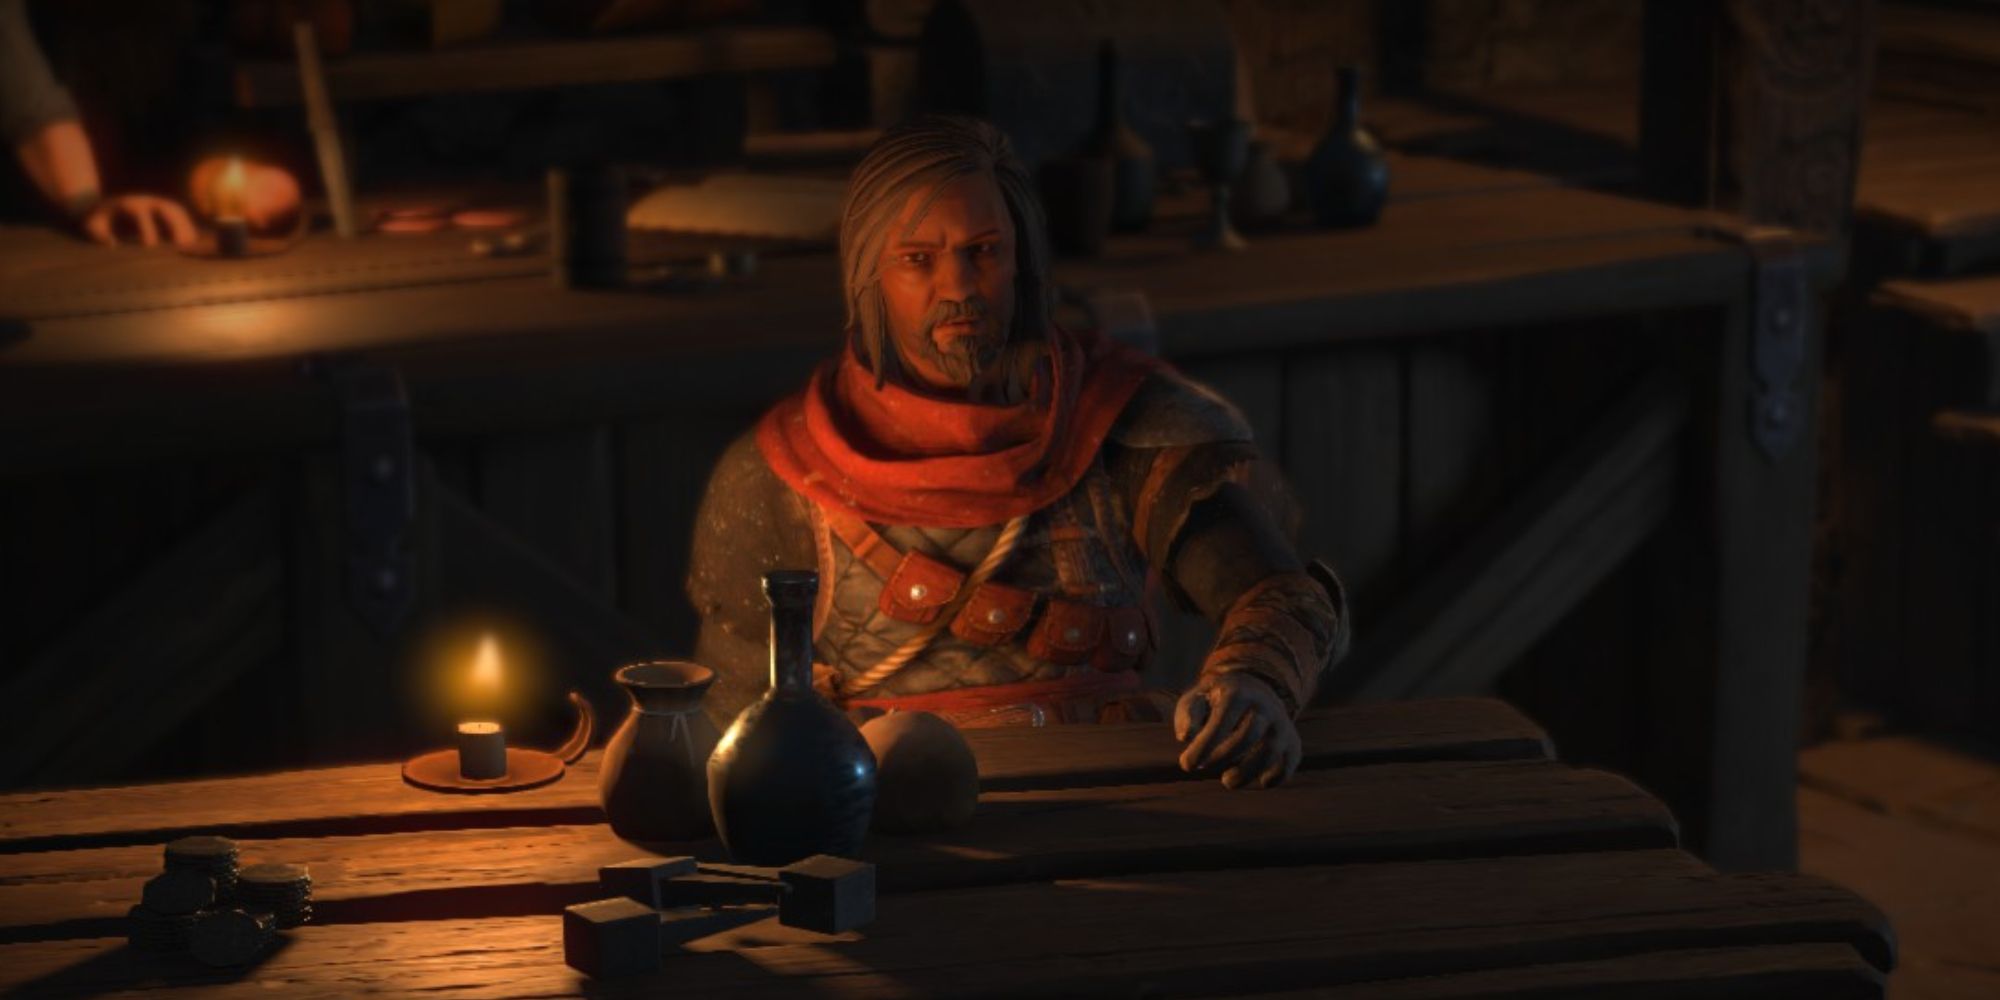 Wartales a close up POV shot of an armoured man sat in a dimly lit tavern at a wooden table with bottles, food and a flickering candle in front of him